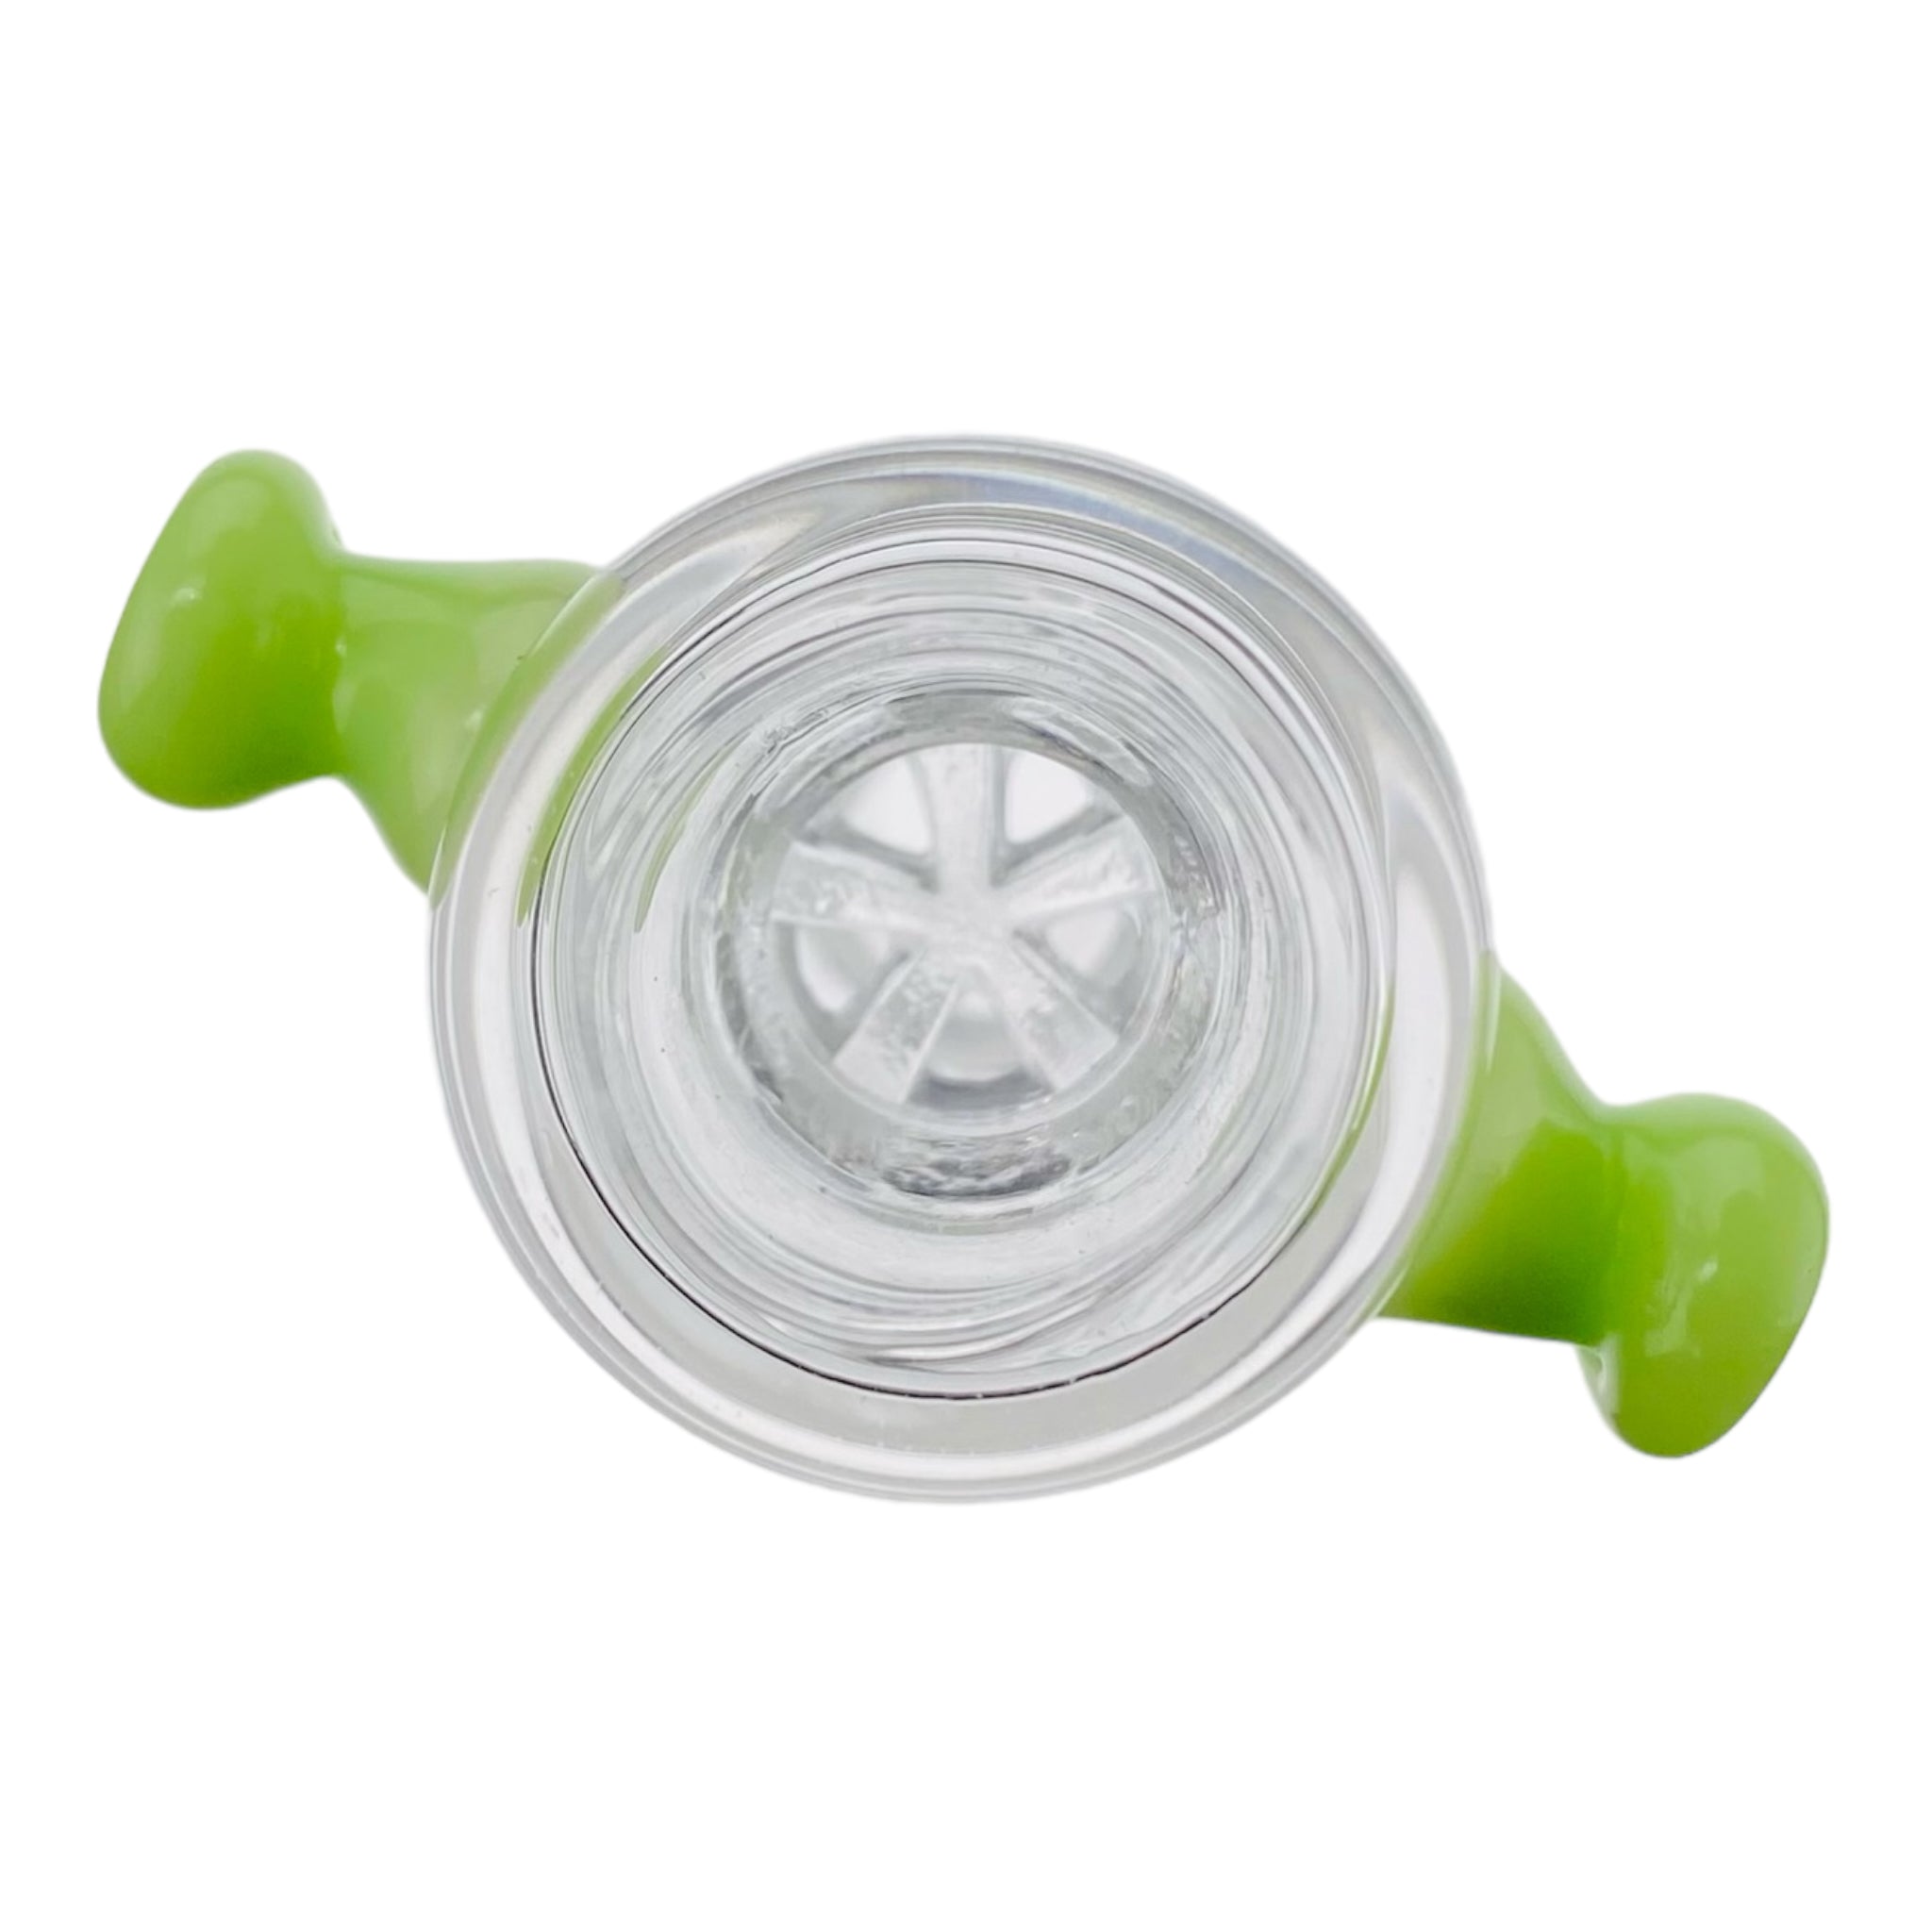 14mm Flower Bowl With Built In Multi Hole Screen Slyme Green Handles